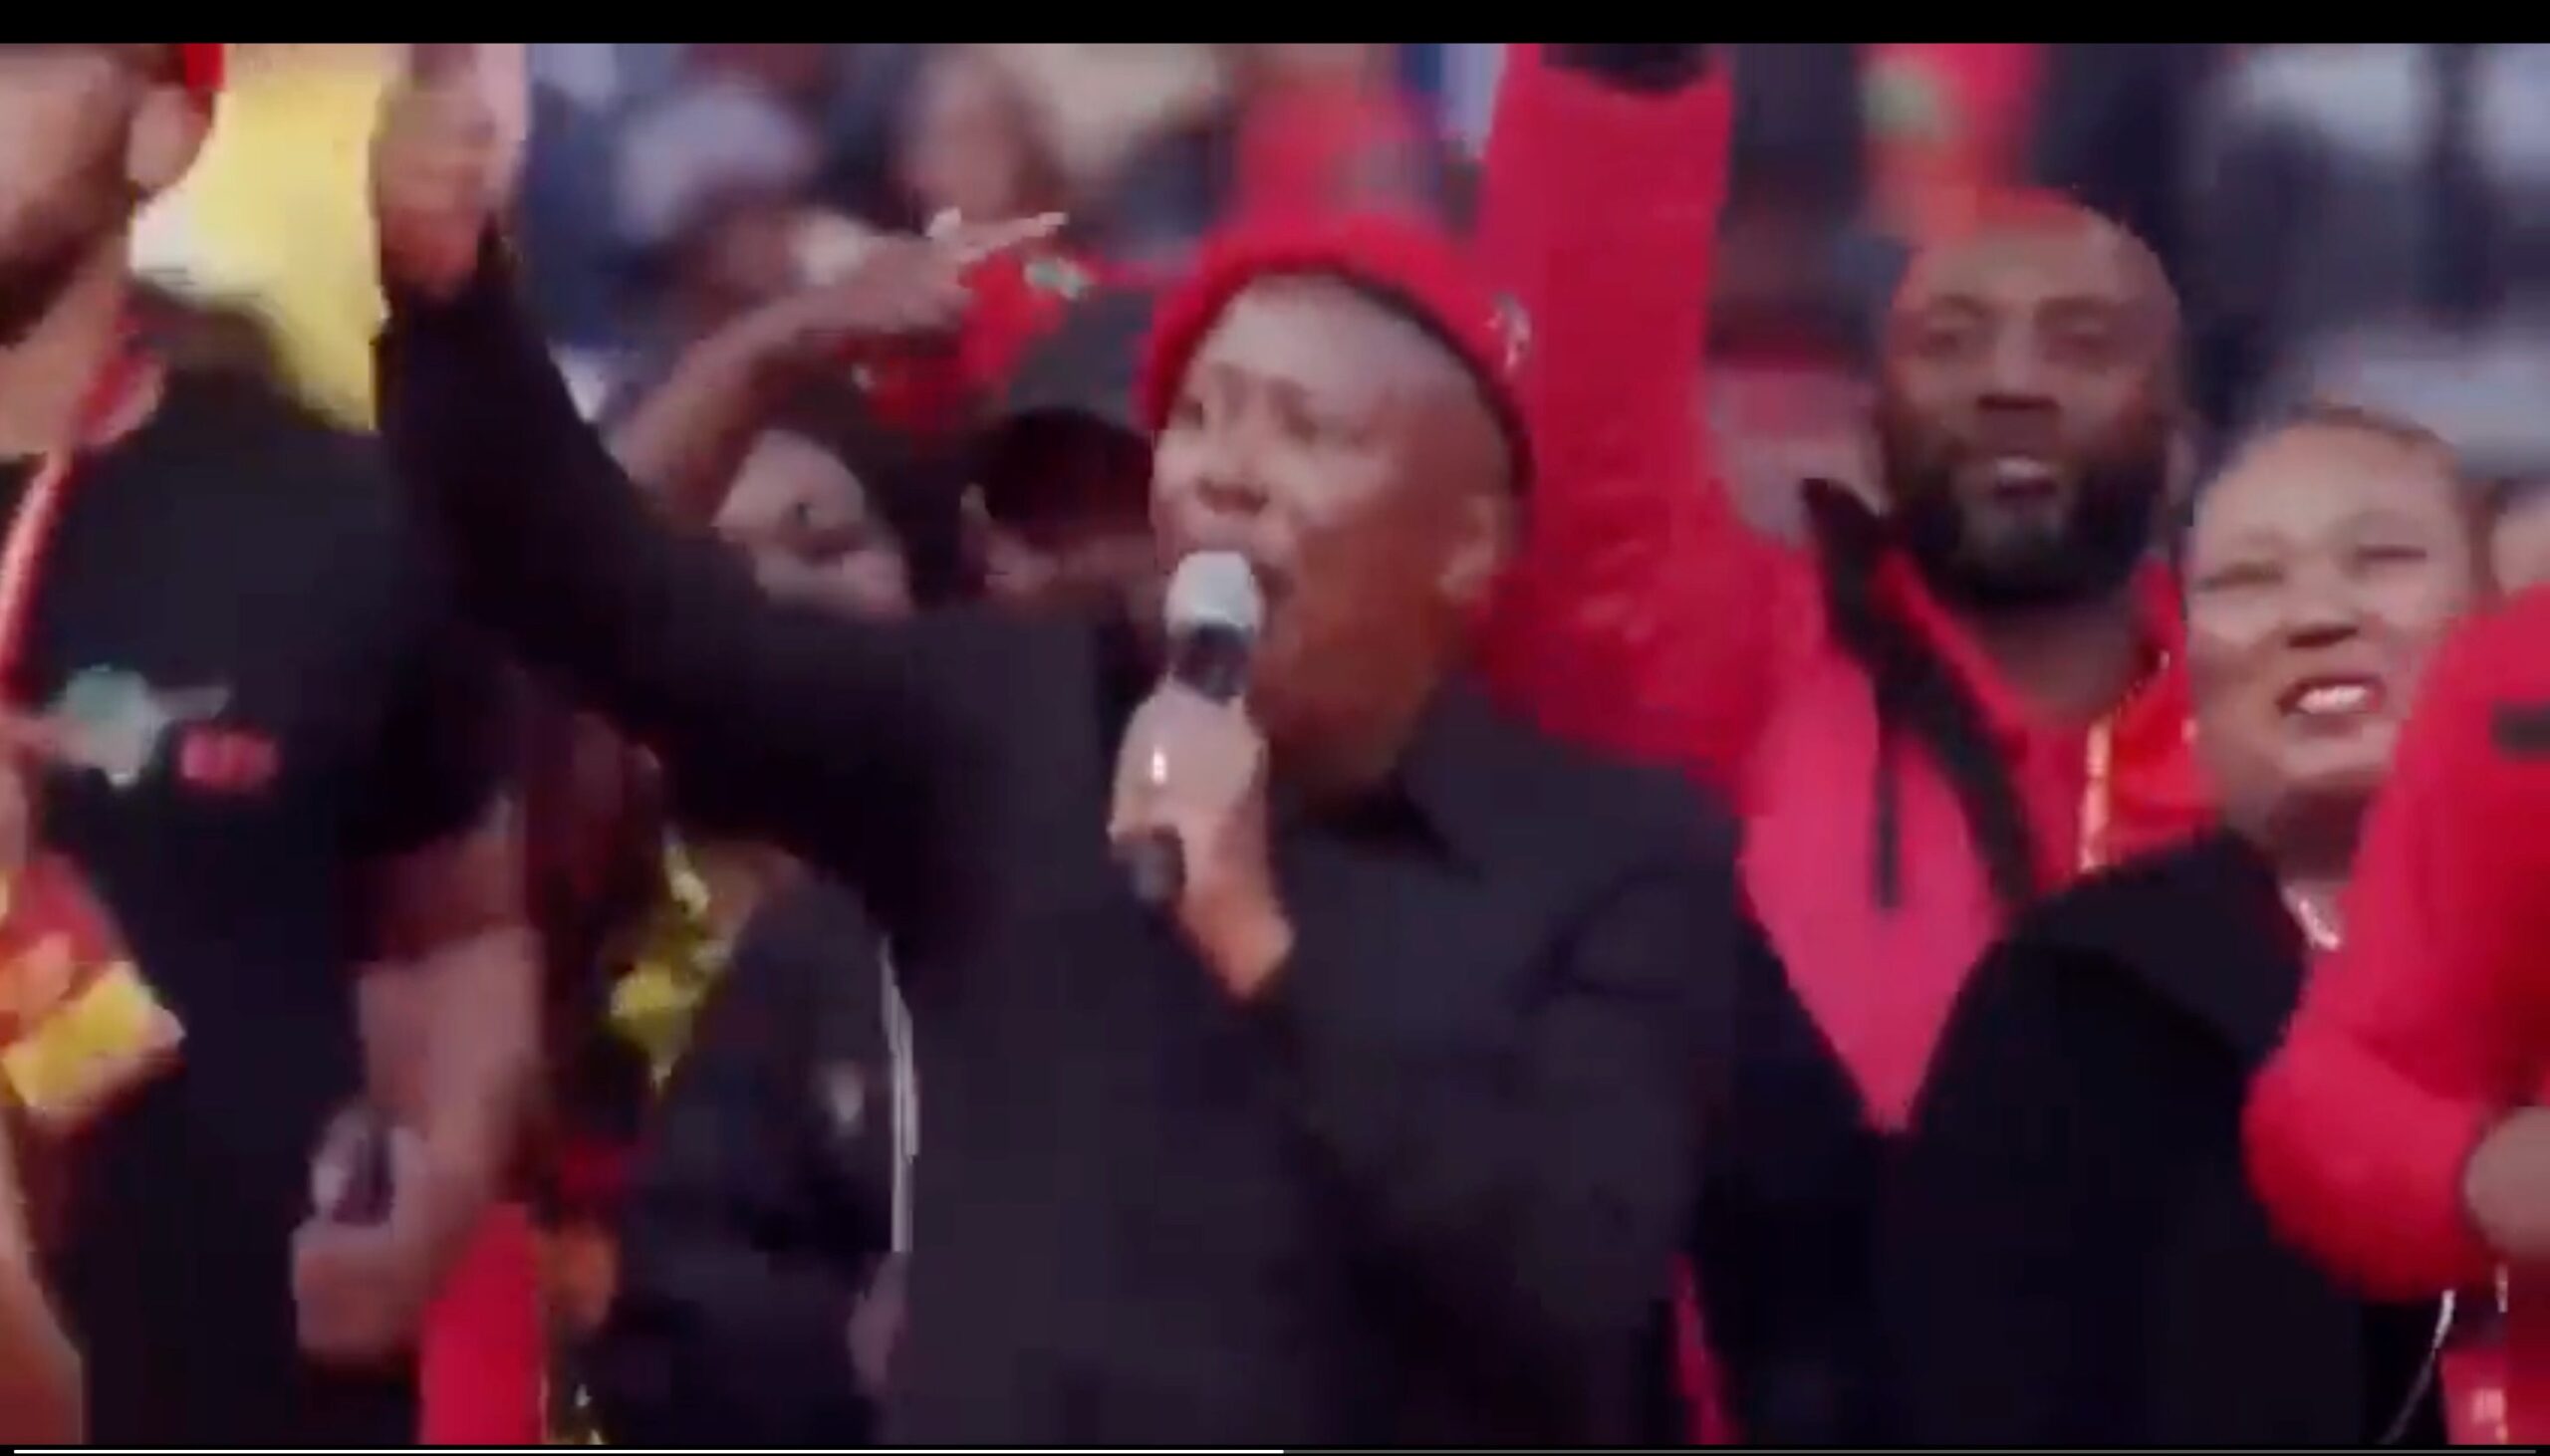 “Kill the Boer…The Farmer!” – Radical South African Political Leader Calls for Executing White People While Massive Crowd Dances and Echoes His Cries (VIDEO)